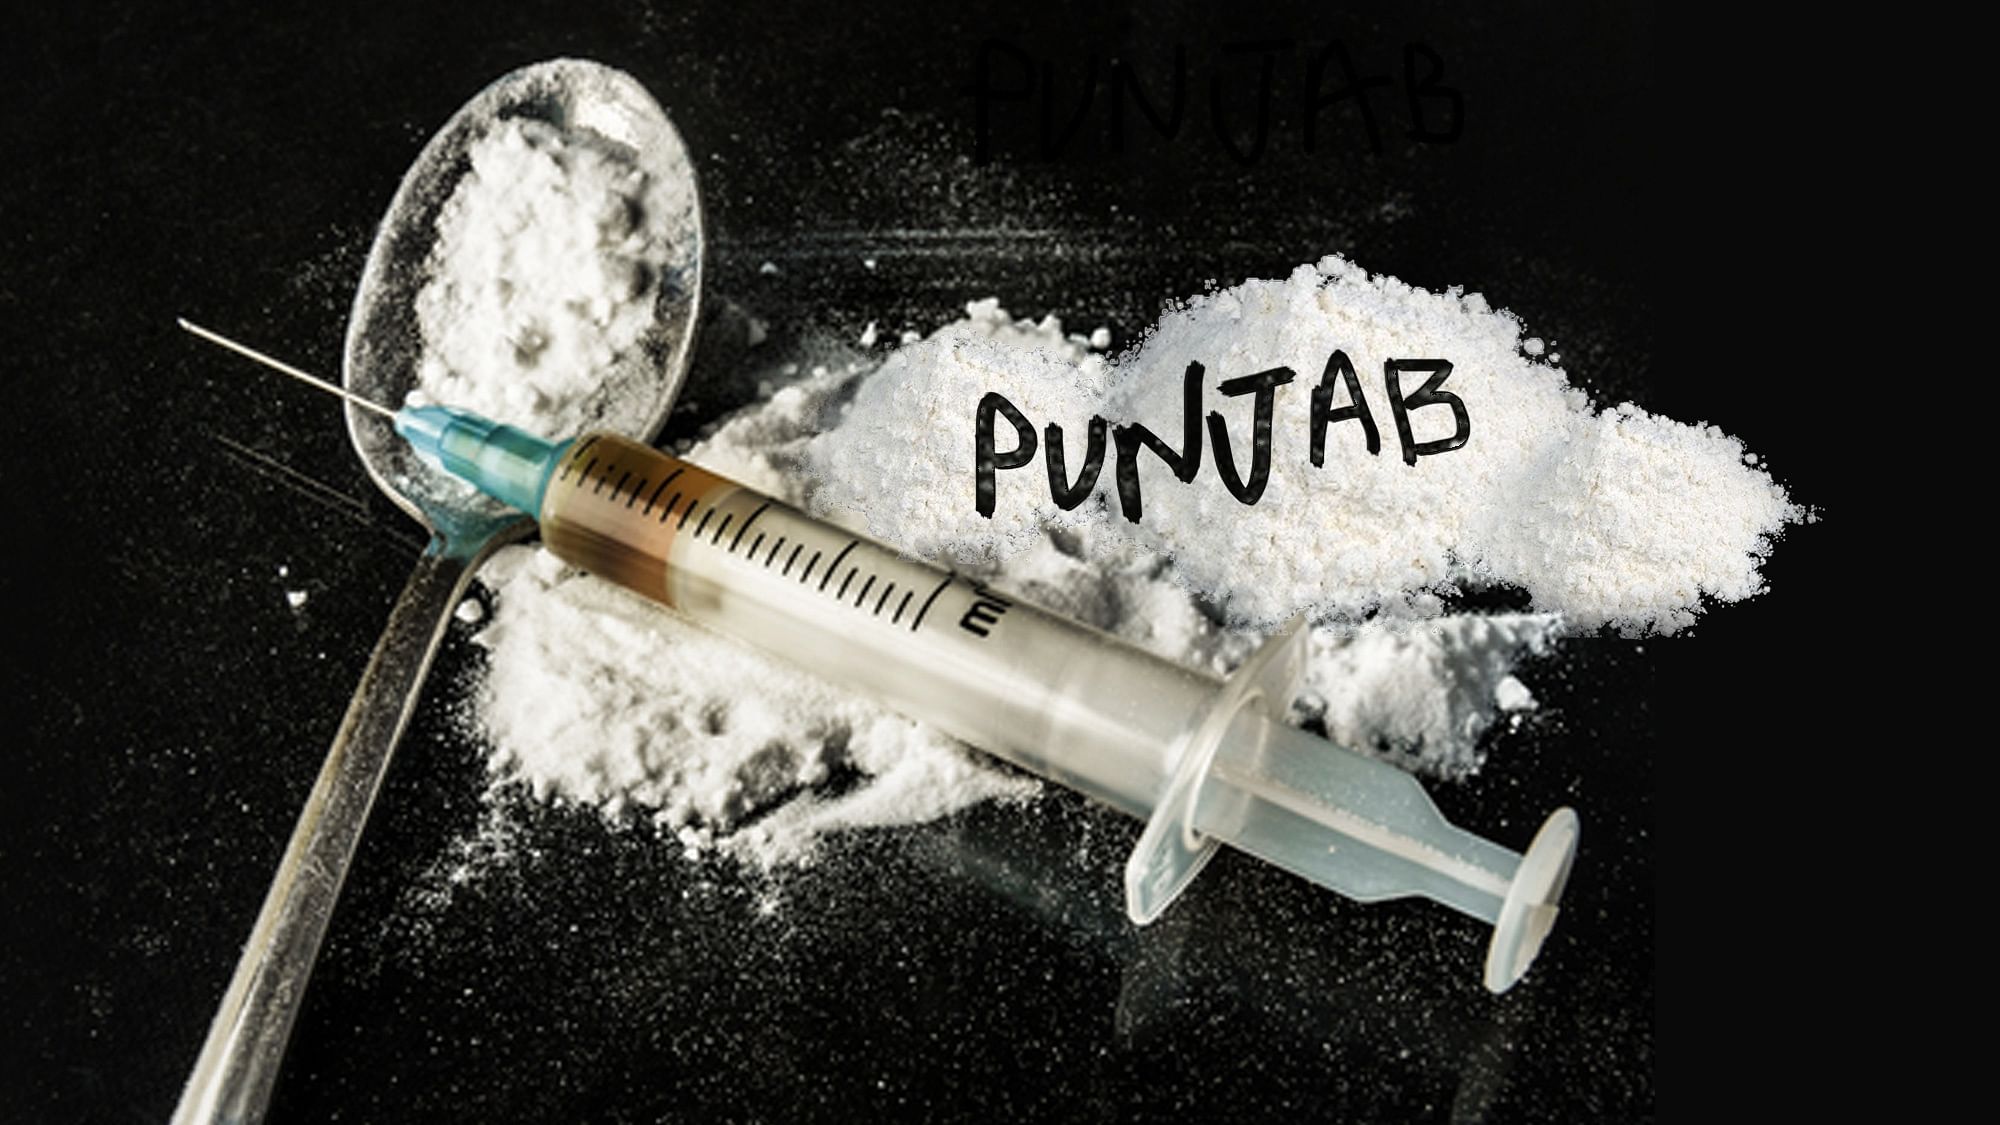 The act is expected to give law enforcement teeth to clamp down on the drug problem in Punjab.&nbsp;